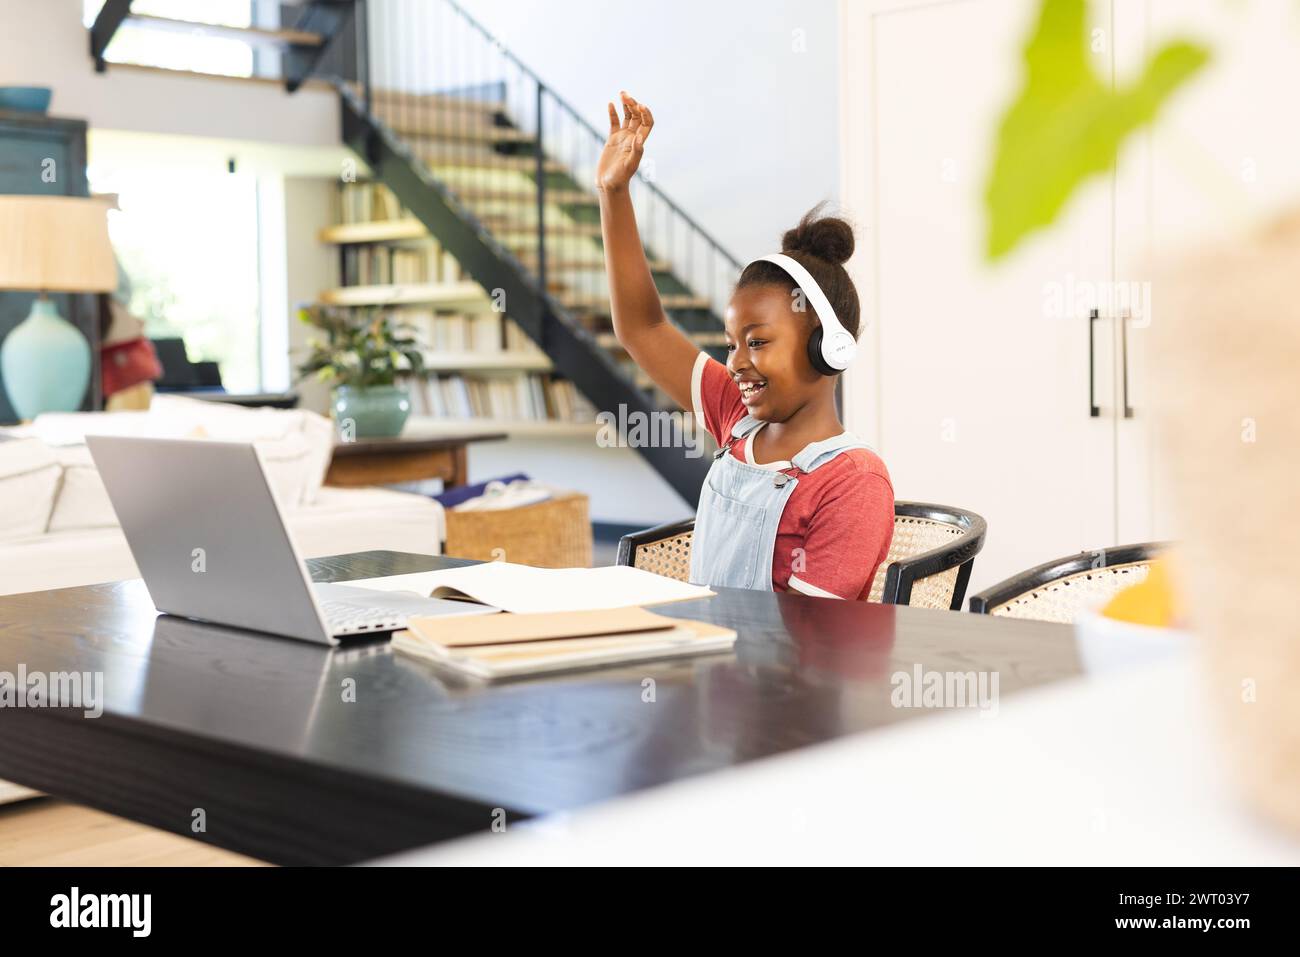 A young African American girl is engaged in an online school session at home Stock Photo